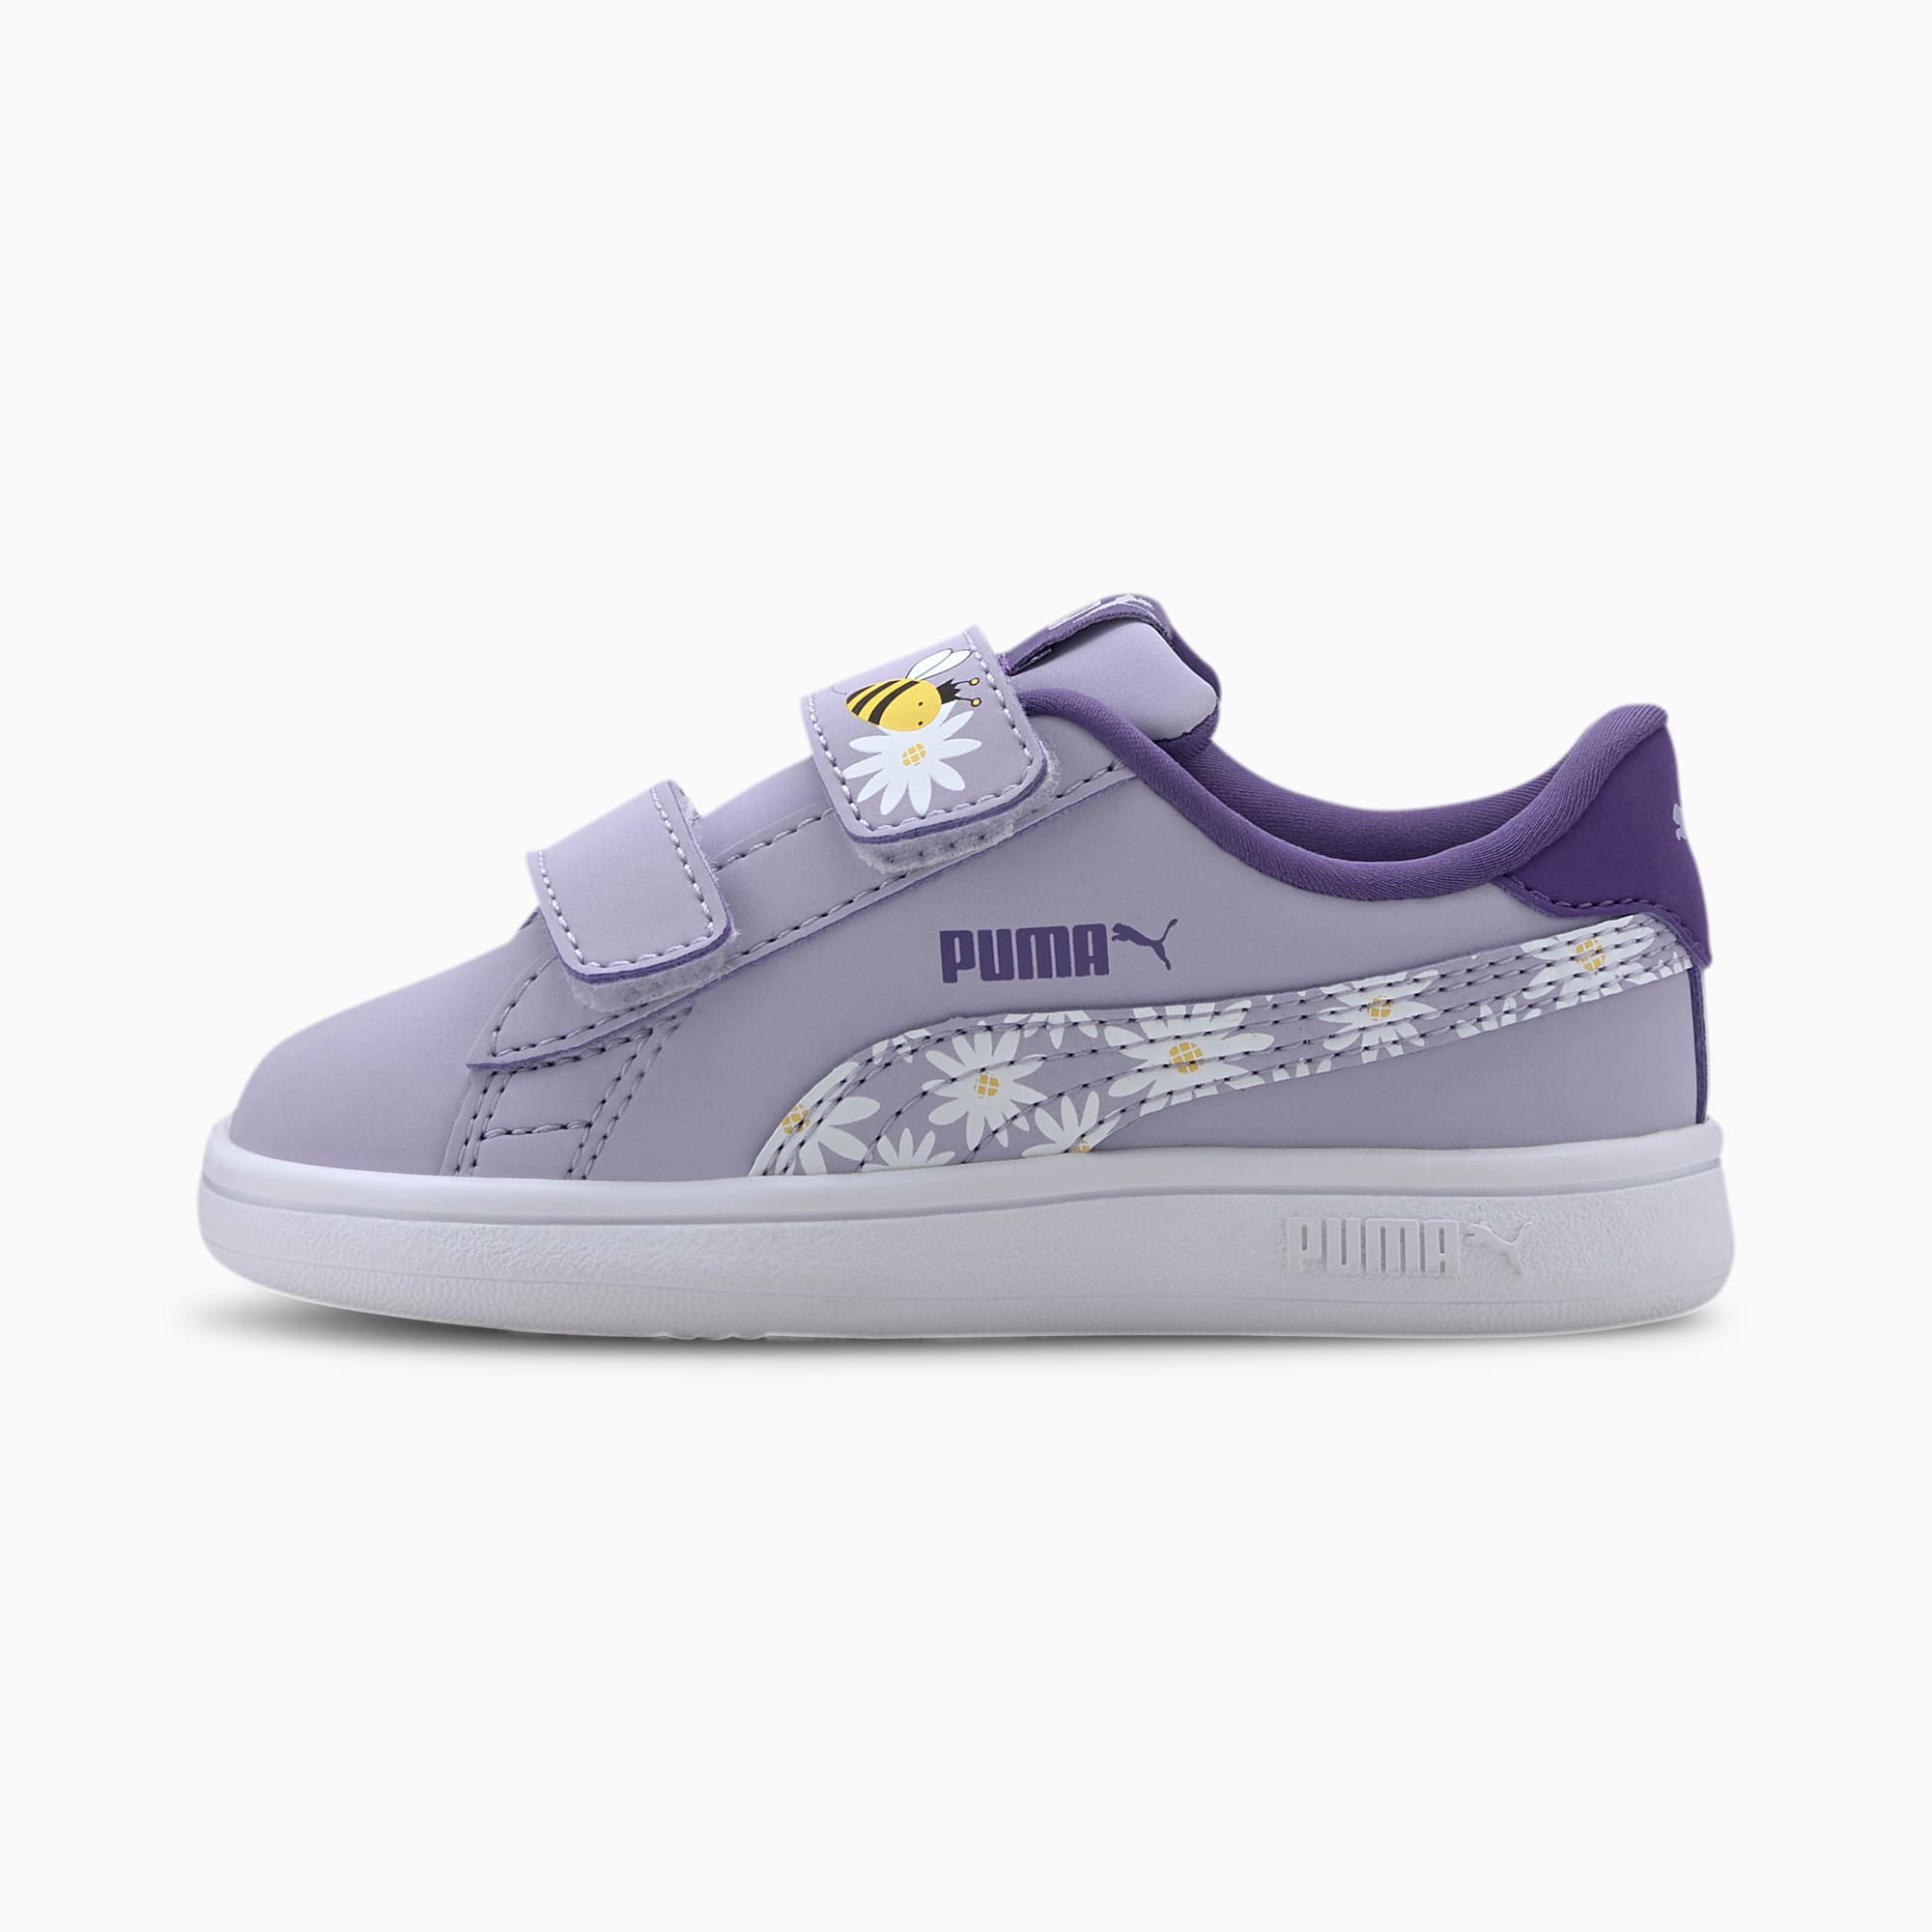 pumas for toddlers